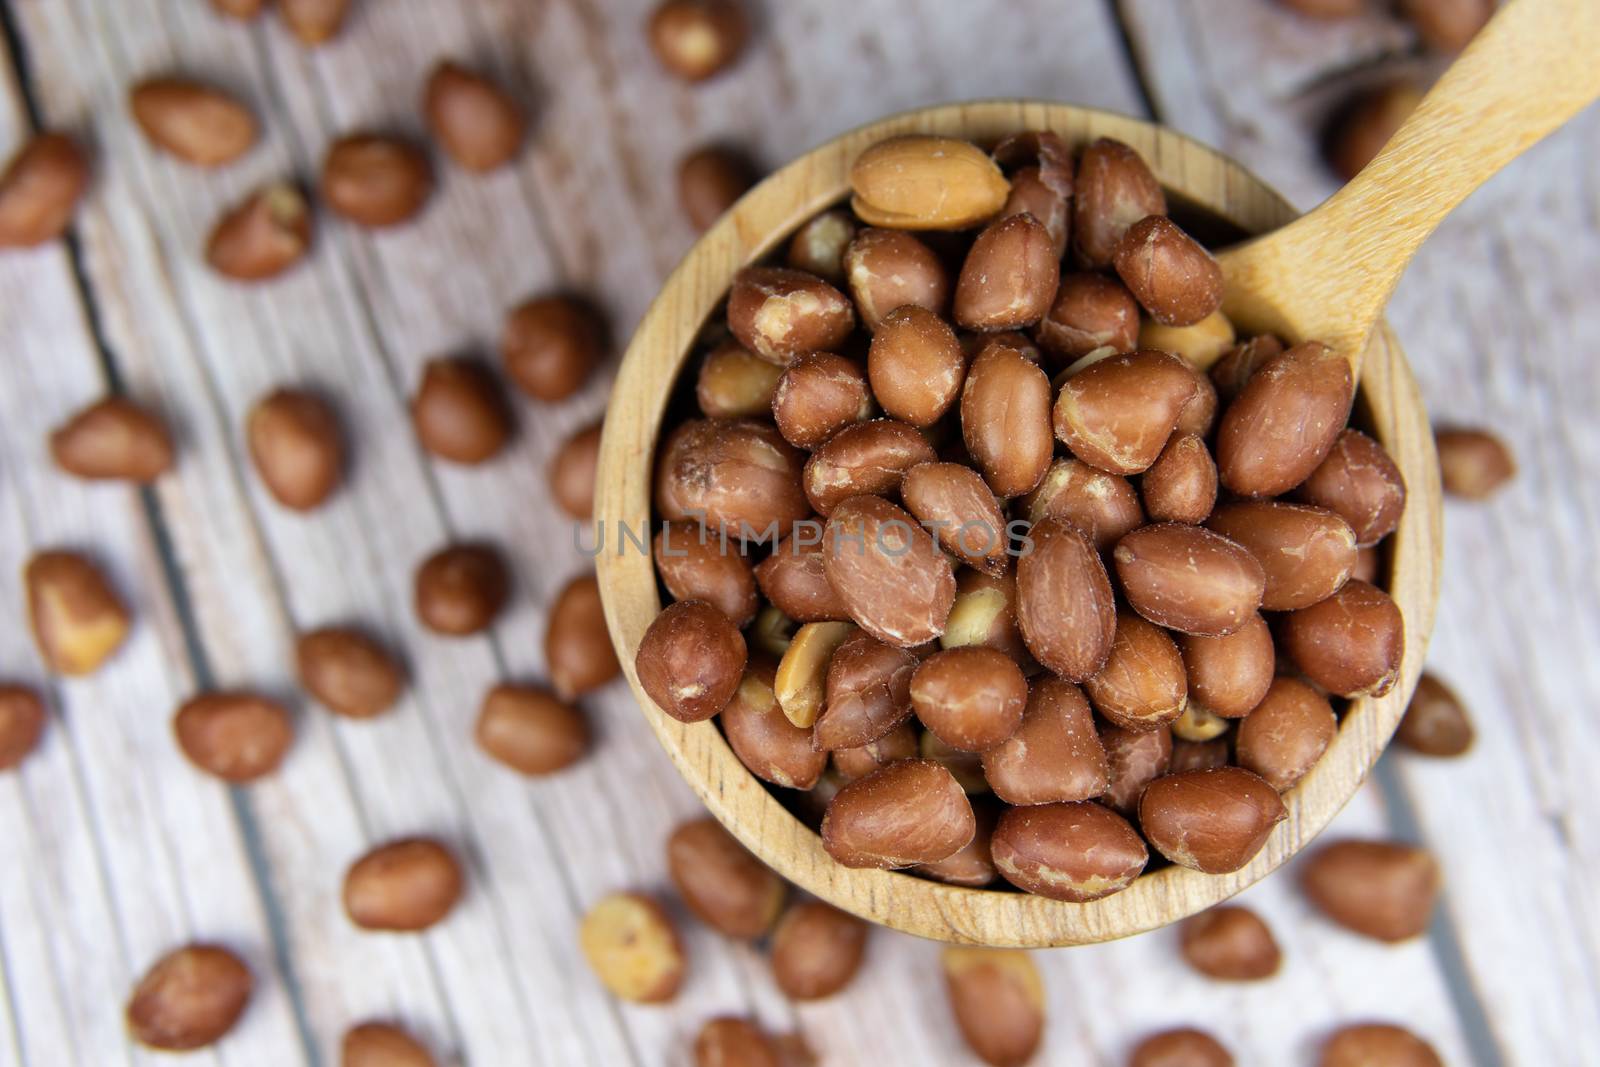 Peanuts peeled in a wooden bowl by Jarukit